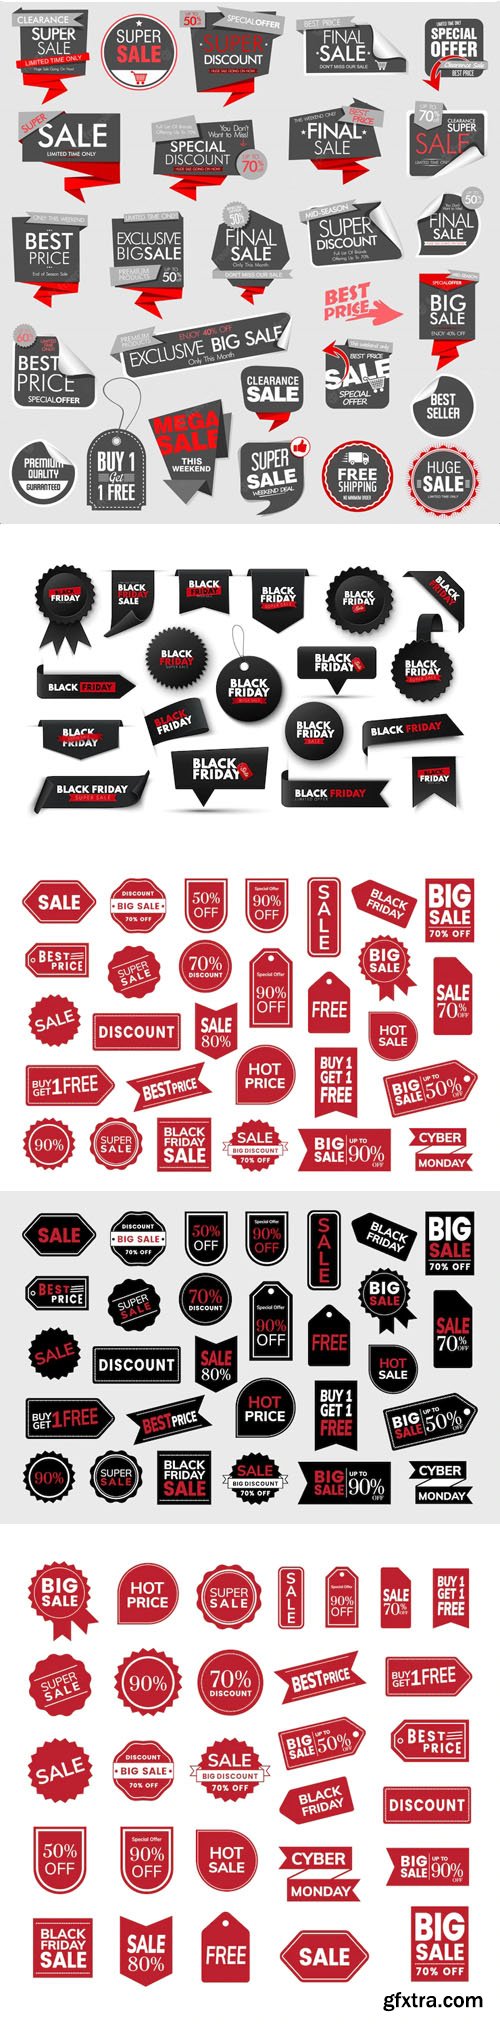 Black Friday - 100+ Shopping Sale Badges & Stickers Vector Templates [Vol.3]